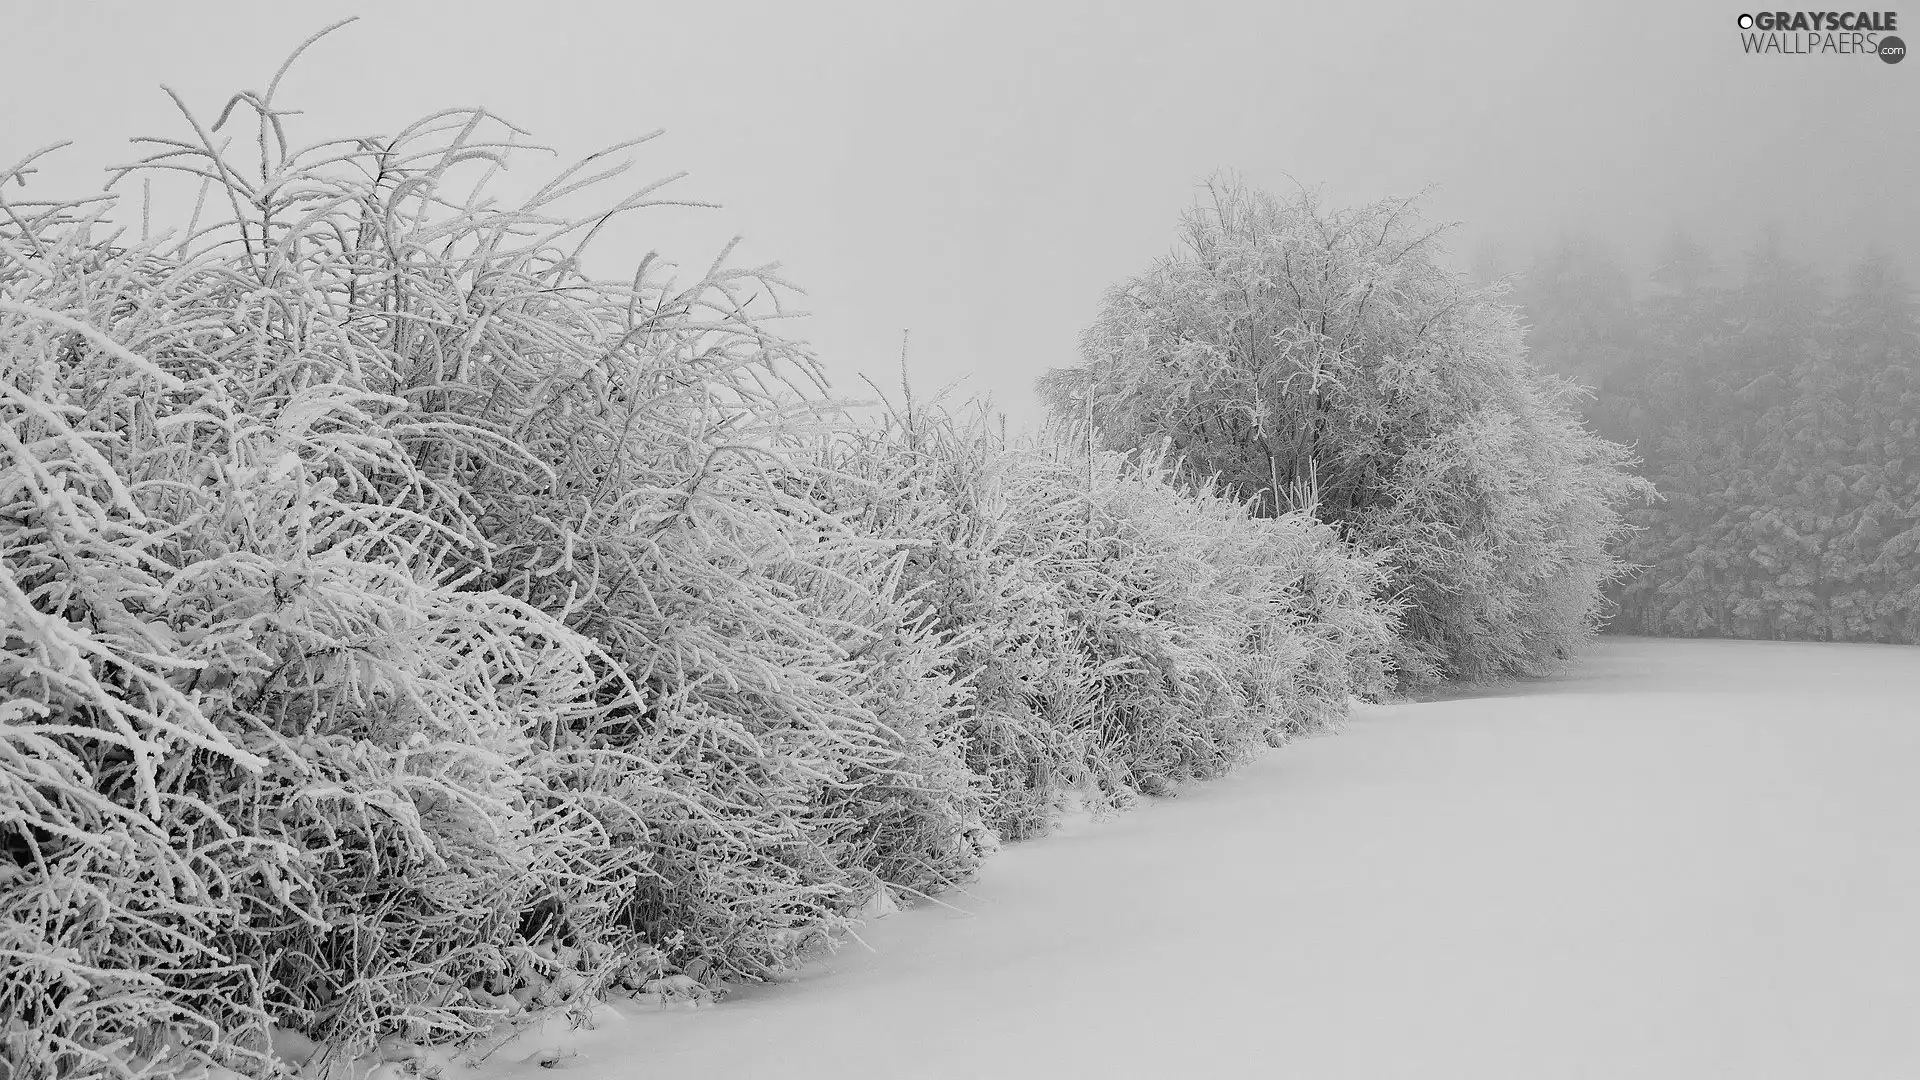 Bush, snow, viewes, frosty, winter, trees, fog